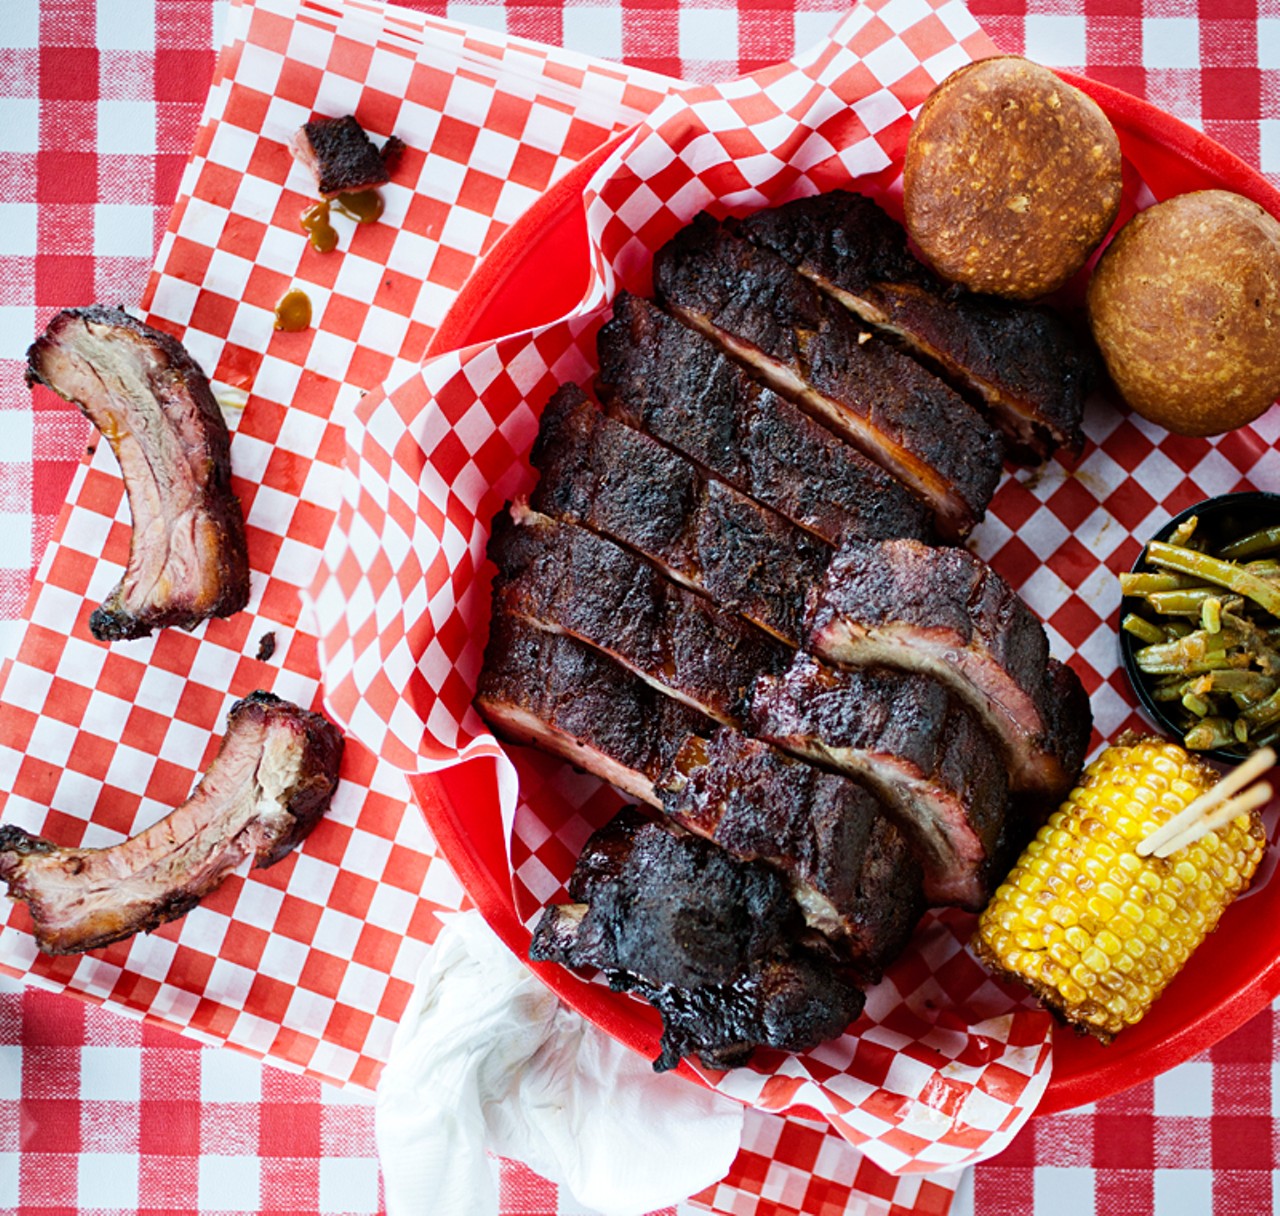 Full slab of ribs with fried biscuits, fried corn and green beans.